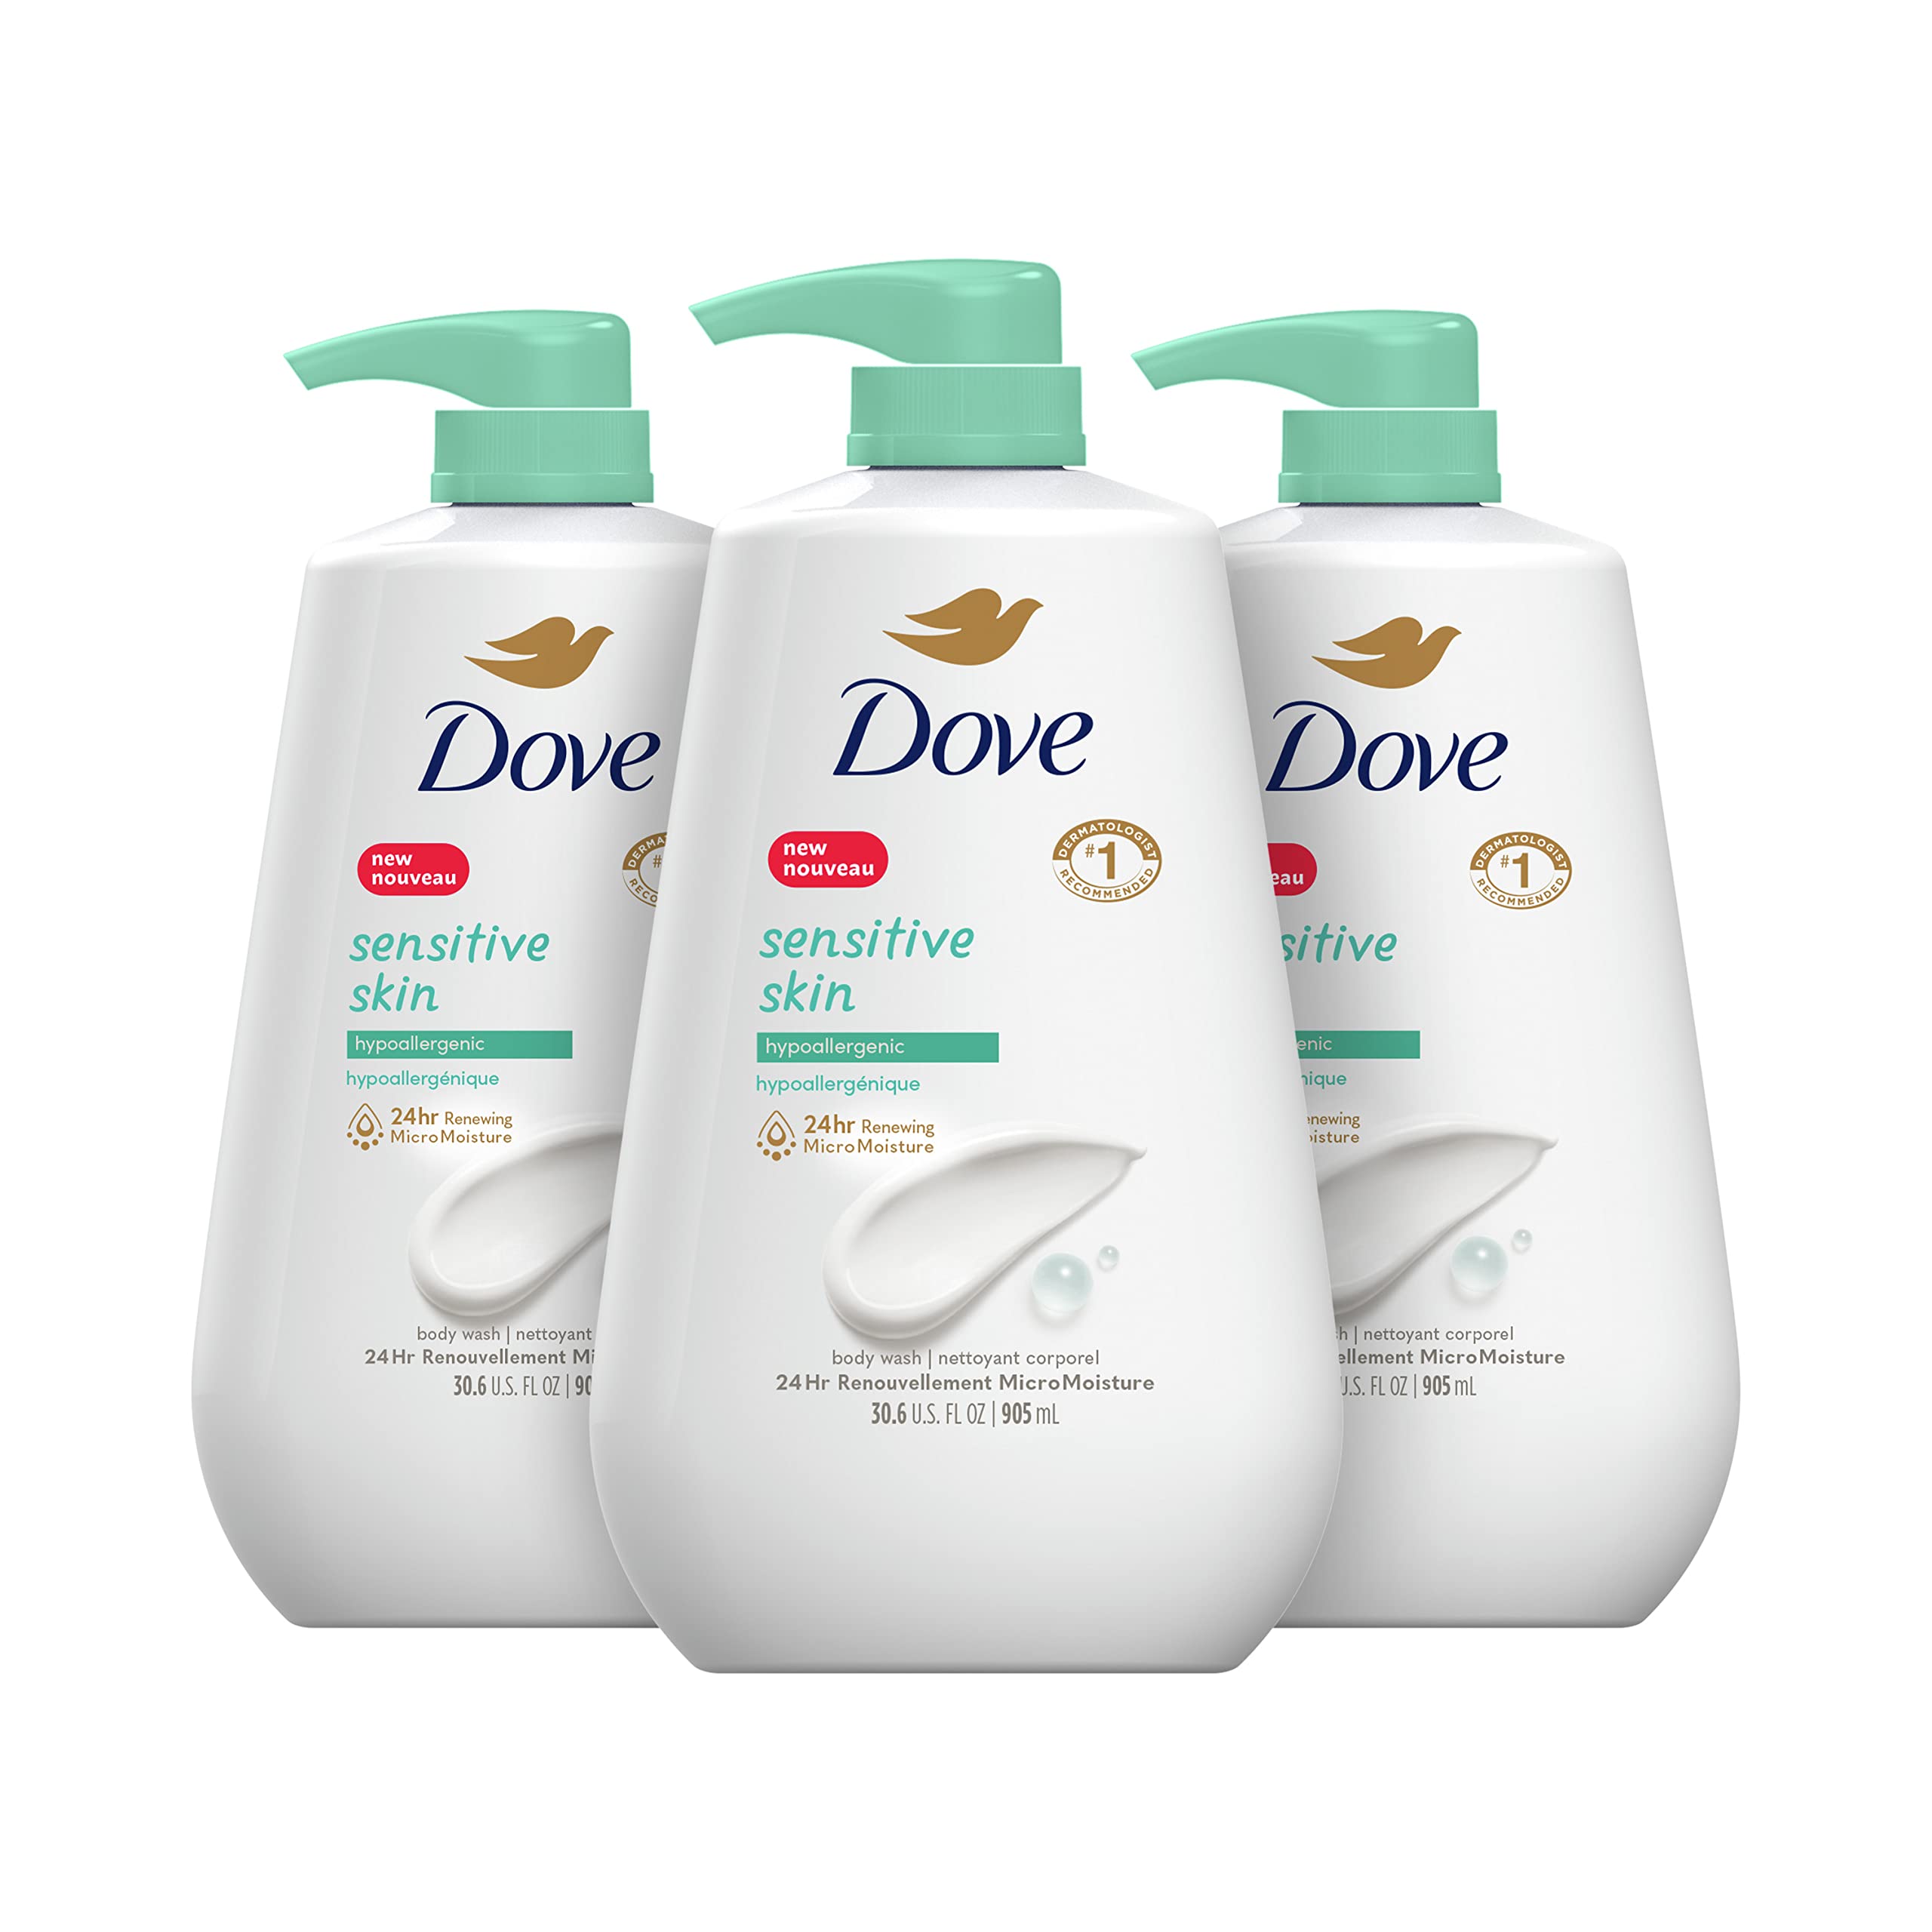 Dove Sensitive Skin Body Wash, Hypoallergenic and Paraben-Free, 30.6 fl oz (Pack of 3) Fragranced 30.6 Fl Oz (Pack of 3), List Price is $29.97, Now Only $17.78